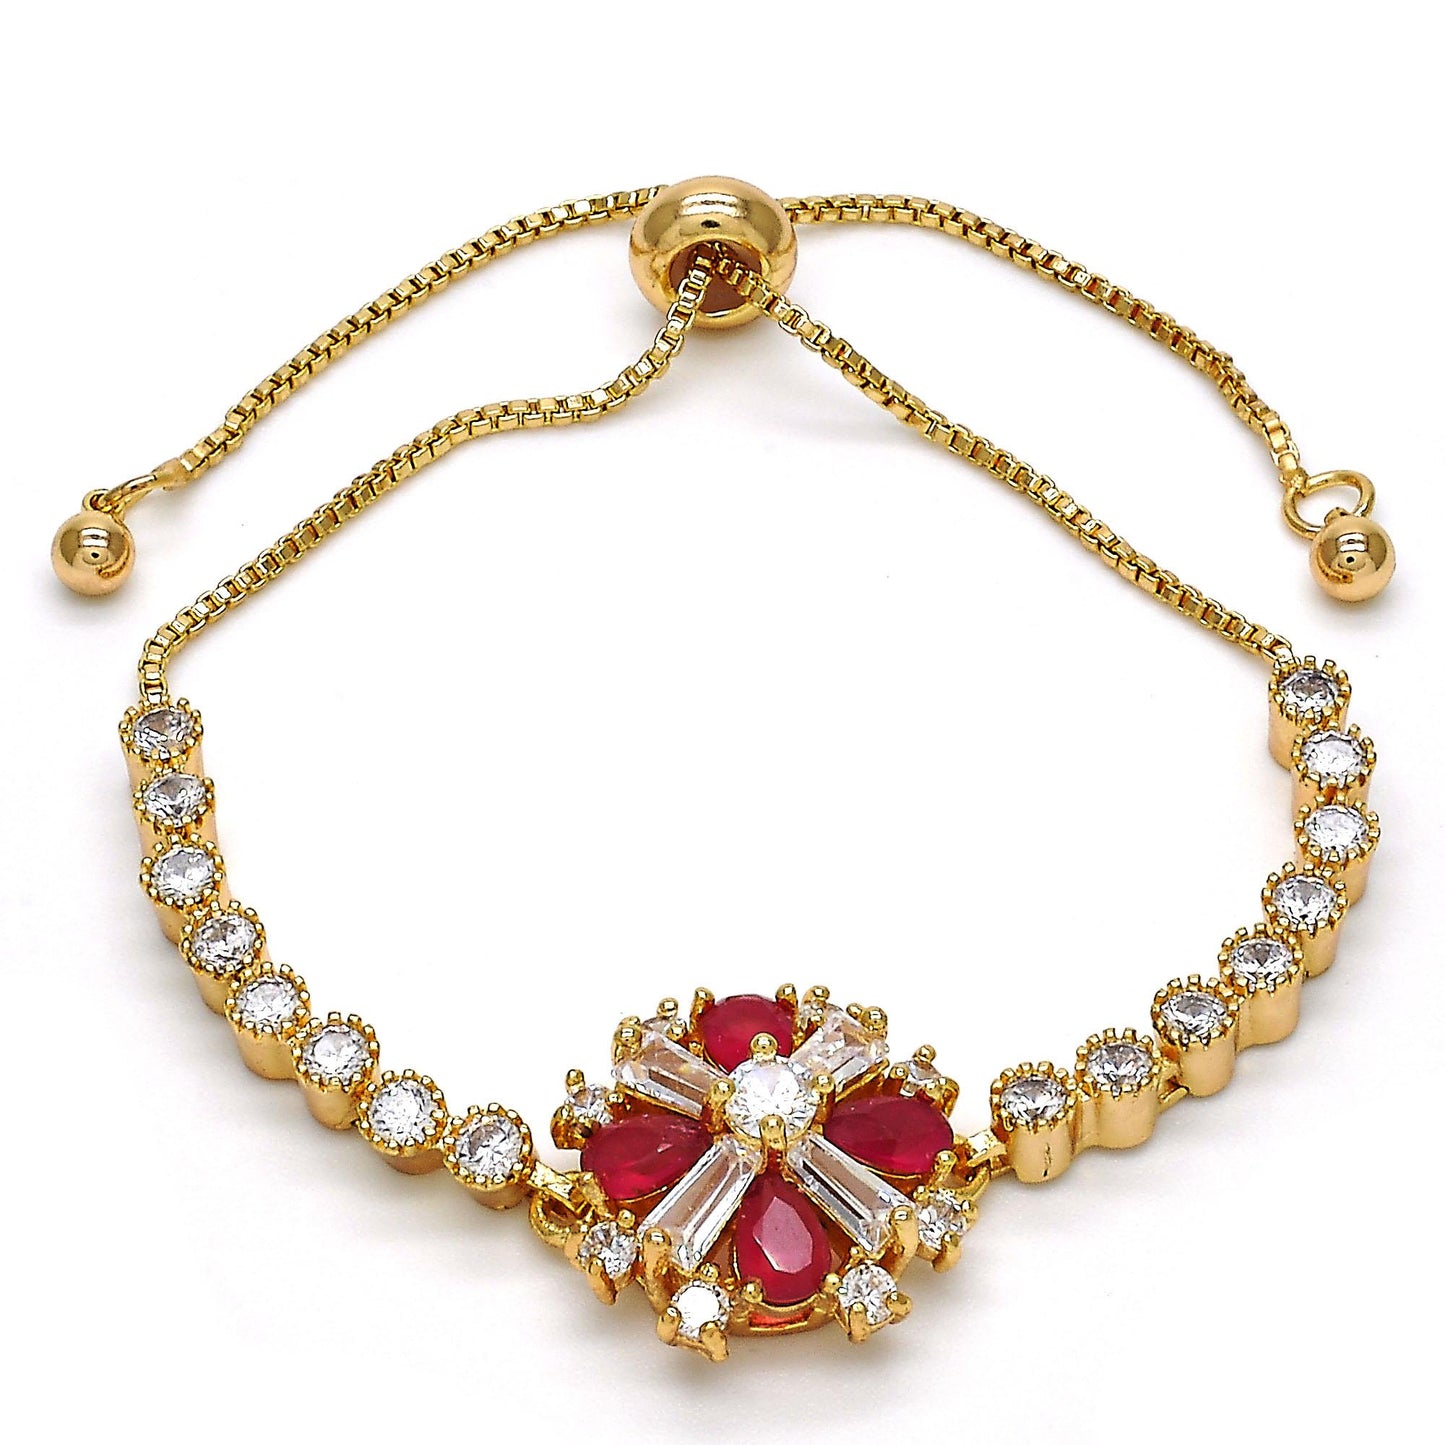 18.1mm Polished 14k Yellow Gold Plated Red Cubic Zirconia Bolo Bracelet, 10 inches (SKU: GL-B1025)